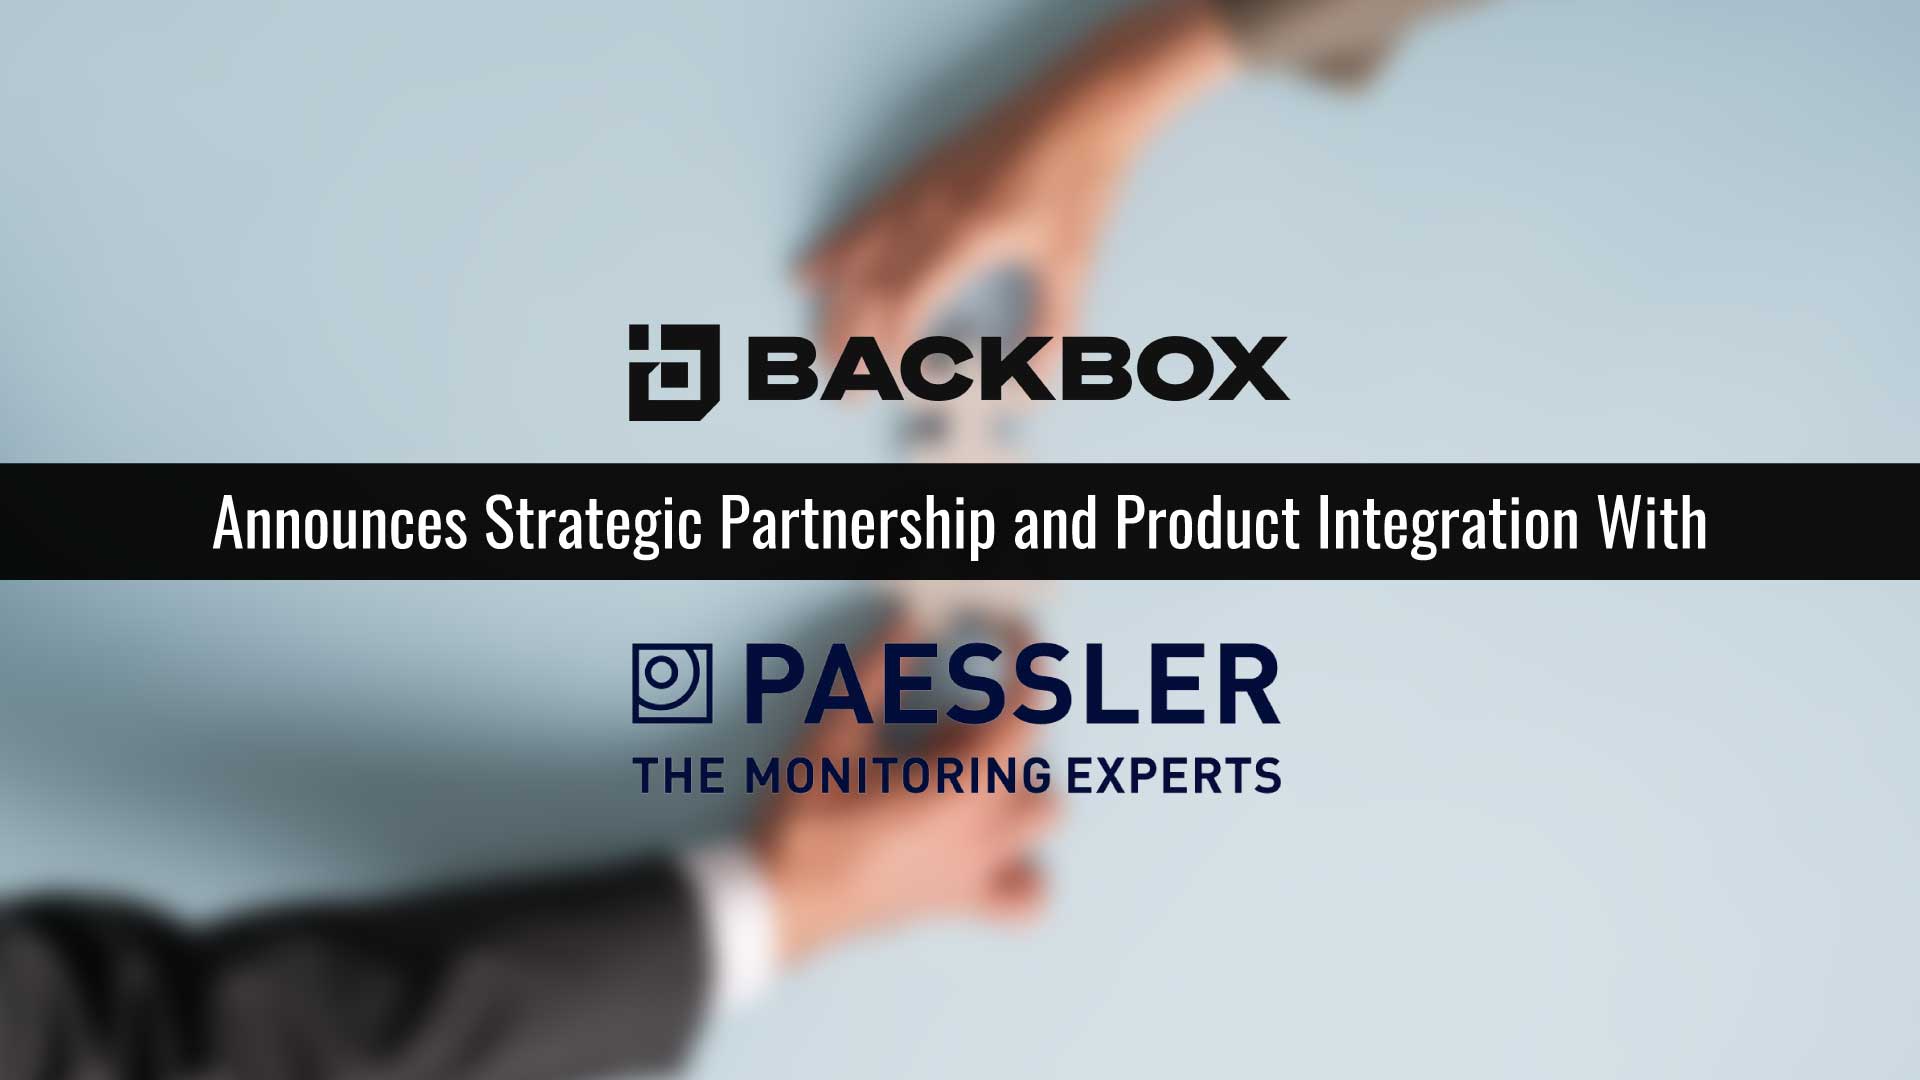 BackBox Announces Strategic Partnership and Product Integration with Paessler AG